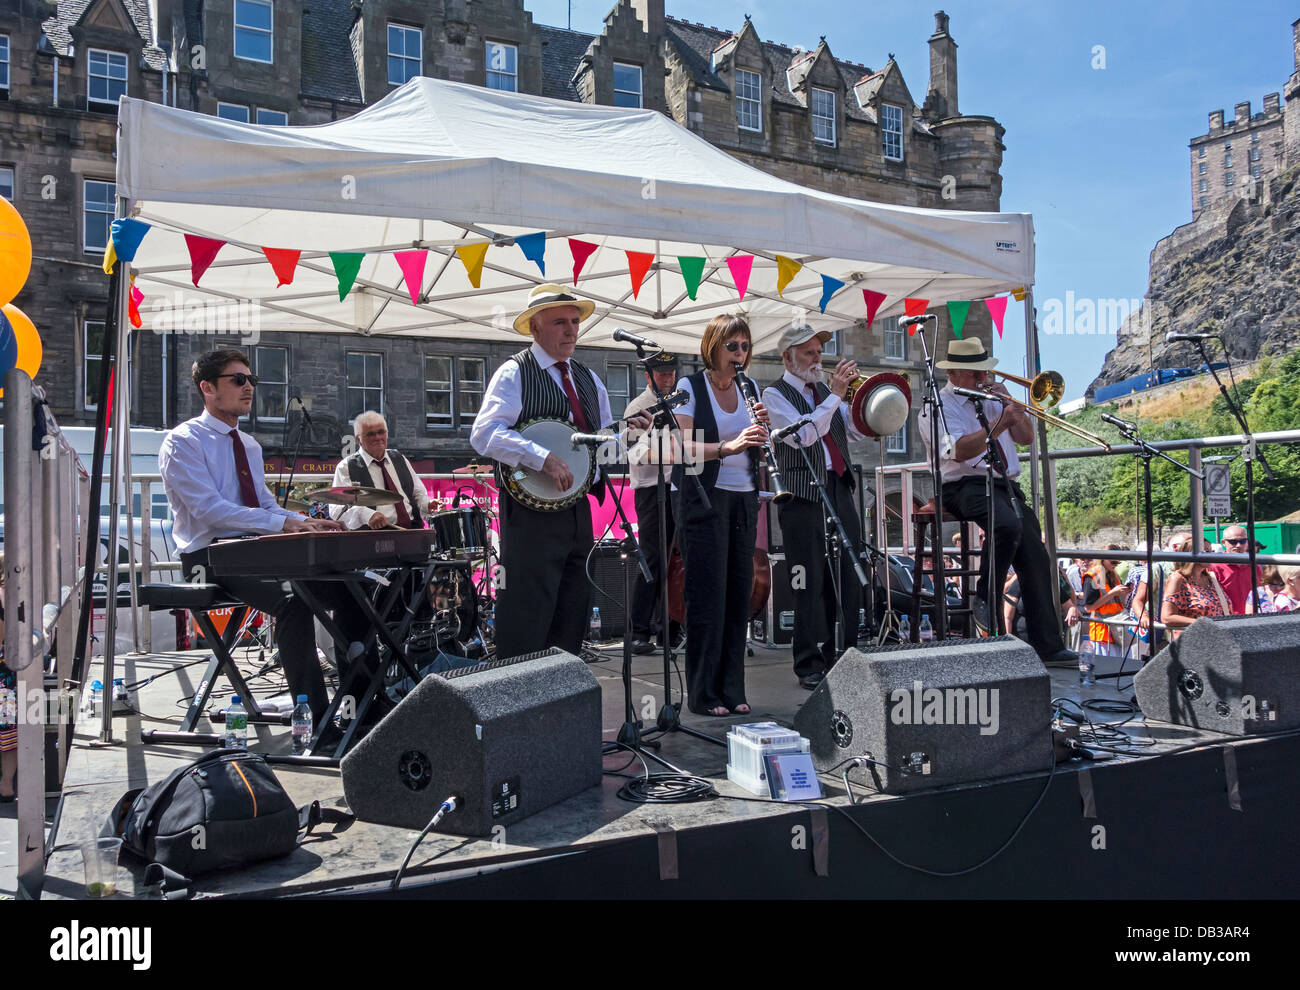 The Rae Brothers New Orleans Jazz Band playing at 2013 Edinburgh Jazz & Blues Festival in Grassmarket at the Mardi Gras event Stock Photo